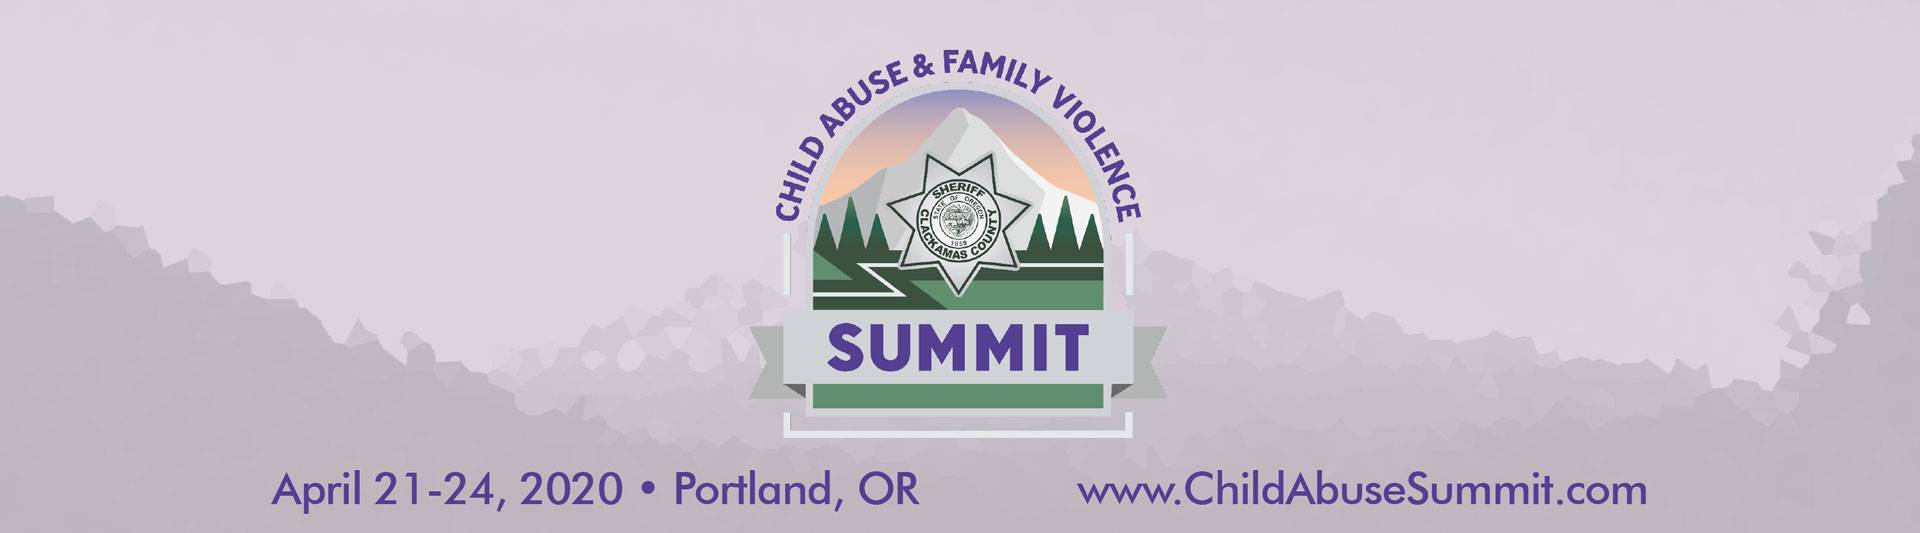 Child Abuse & Family Violence Summit